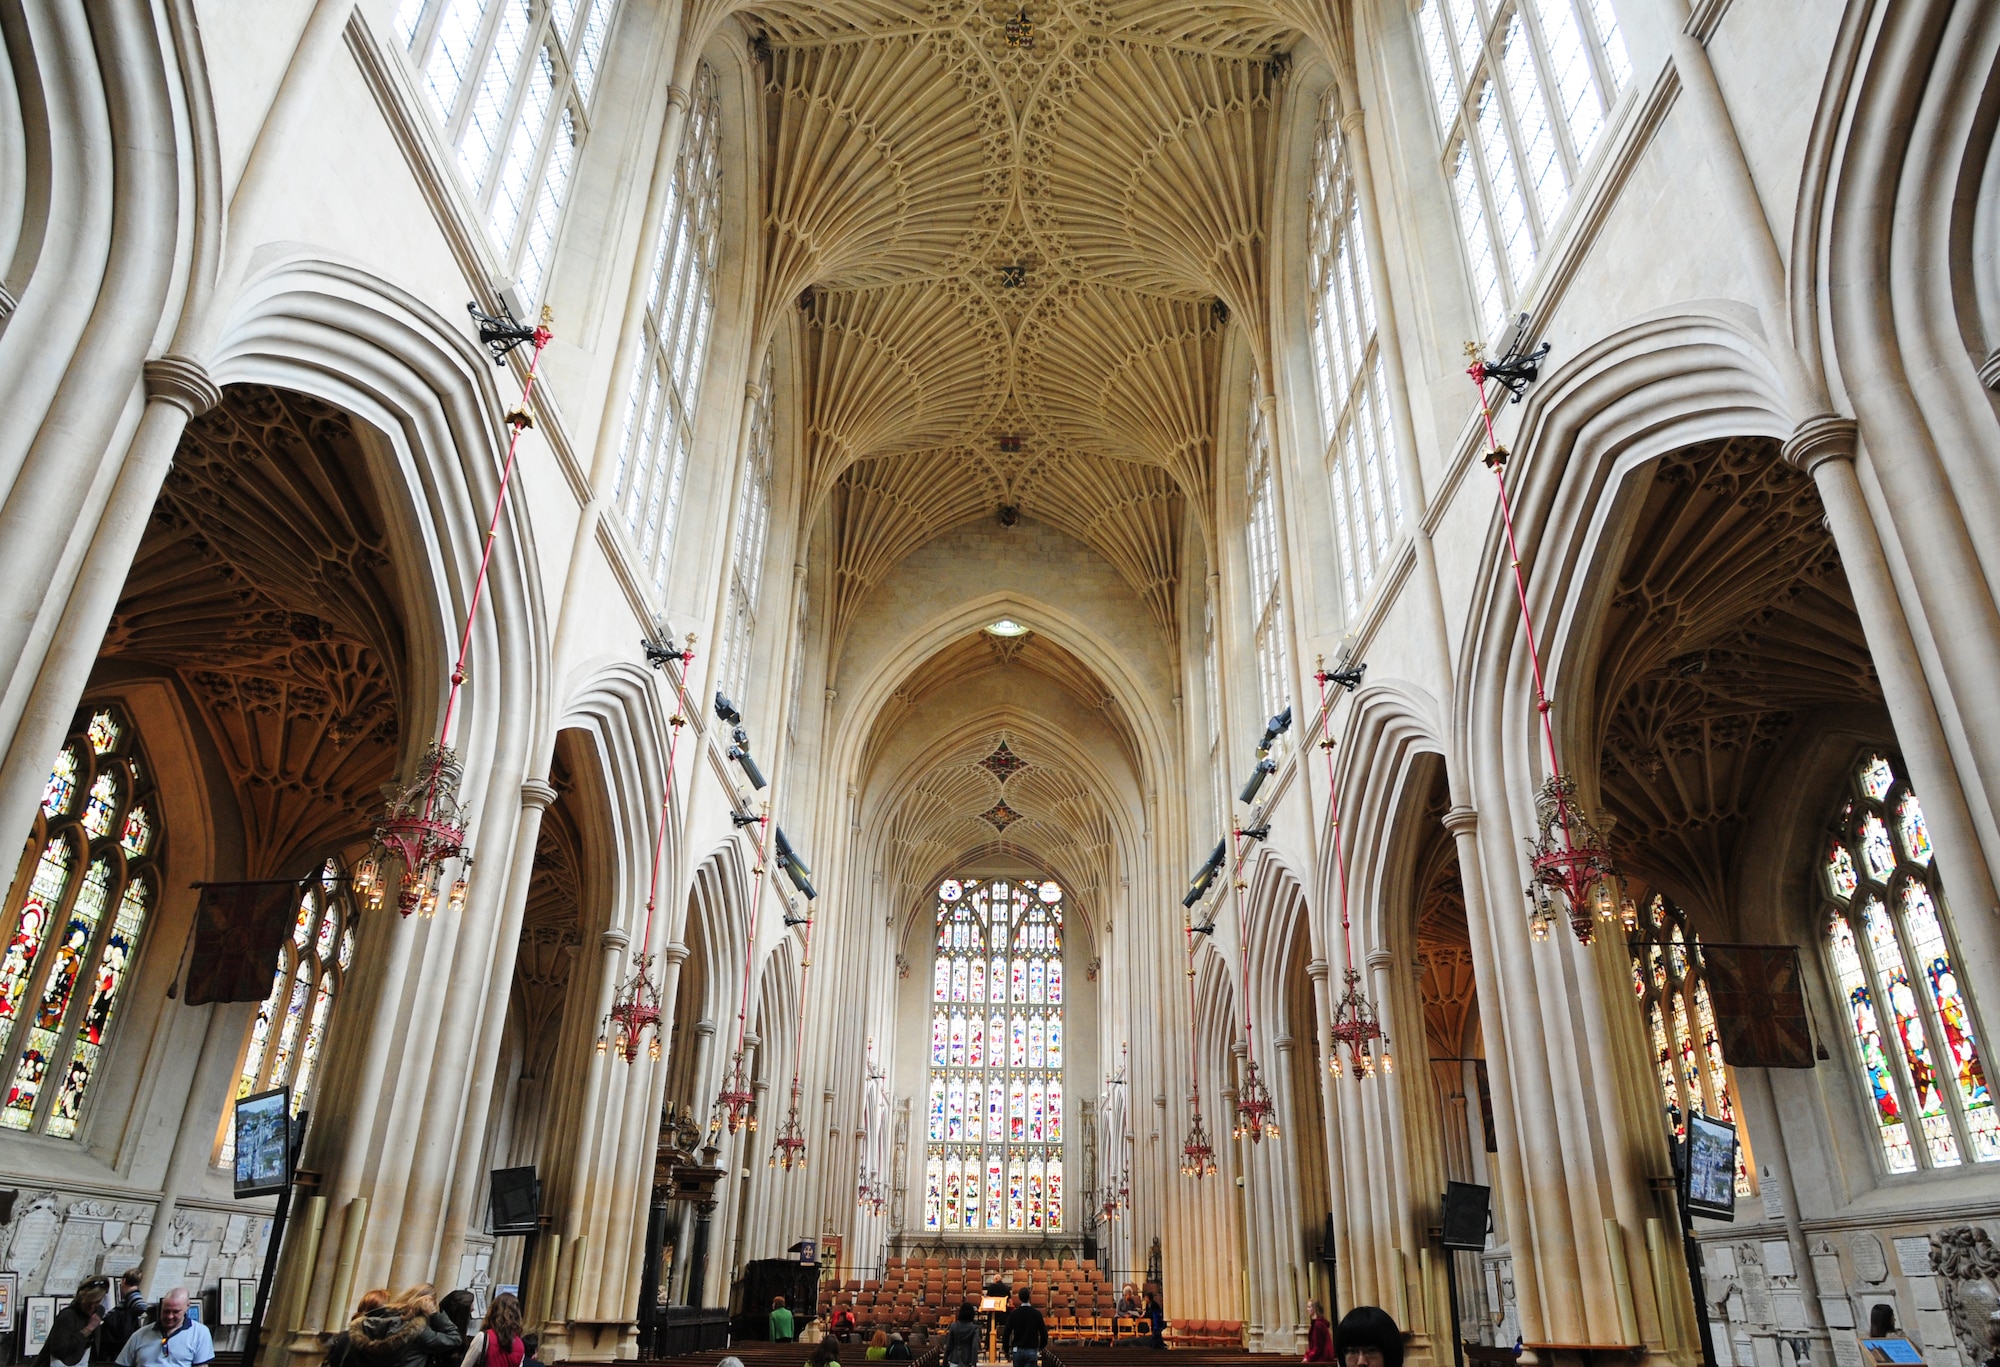 BATH, England – Bath Abbey can seat approximately 1,200 people. Participants in an RAF Lakenheath Information, Tickets and Travel trip went on a walking tour of the City of Bath on April 16, 2011.  The next trip to the city will be May 14, 2011. (U.S. Air Force photo/Staff Sgt. Stephen Linch)